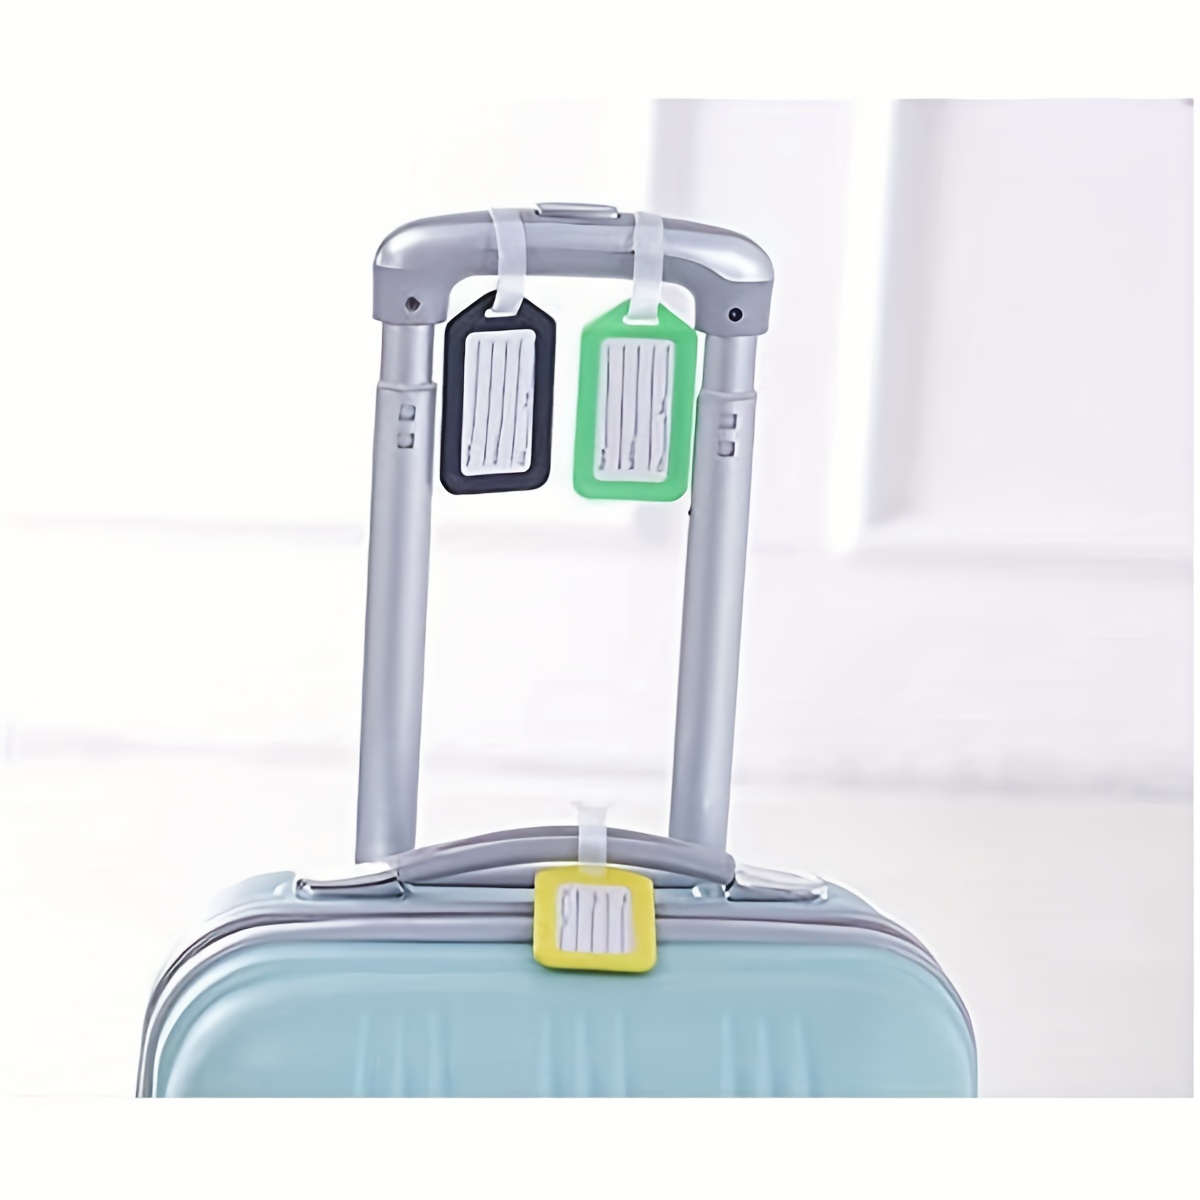 4 Luggage Tag Label ID Address Name Suitcase Baggage Cabin Bag